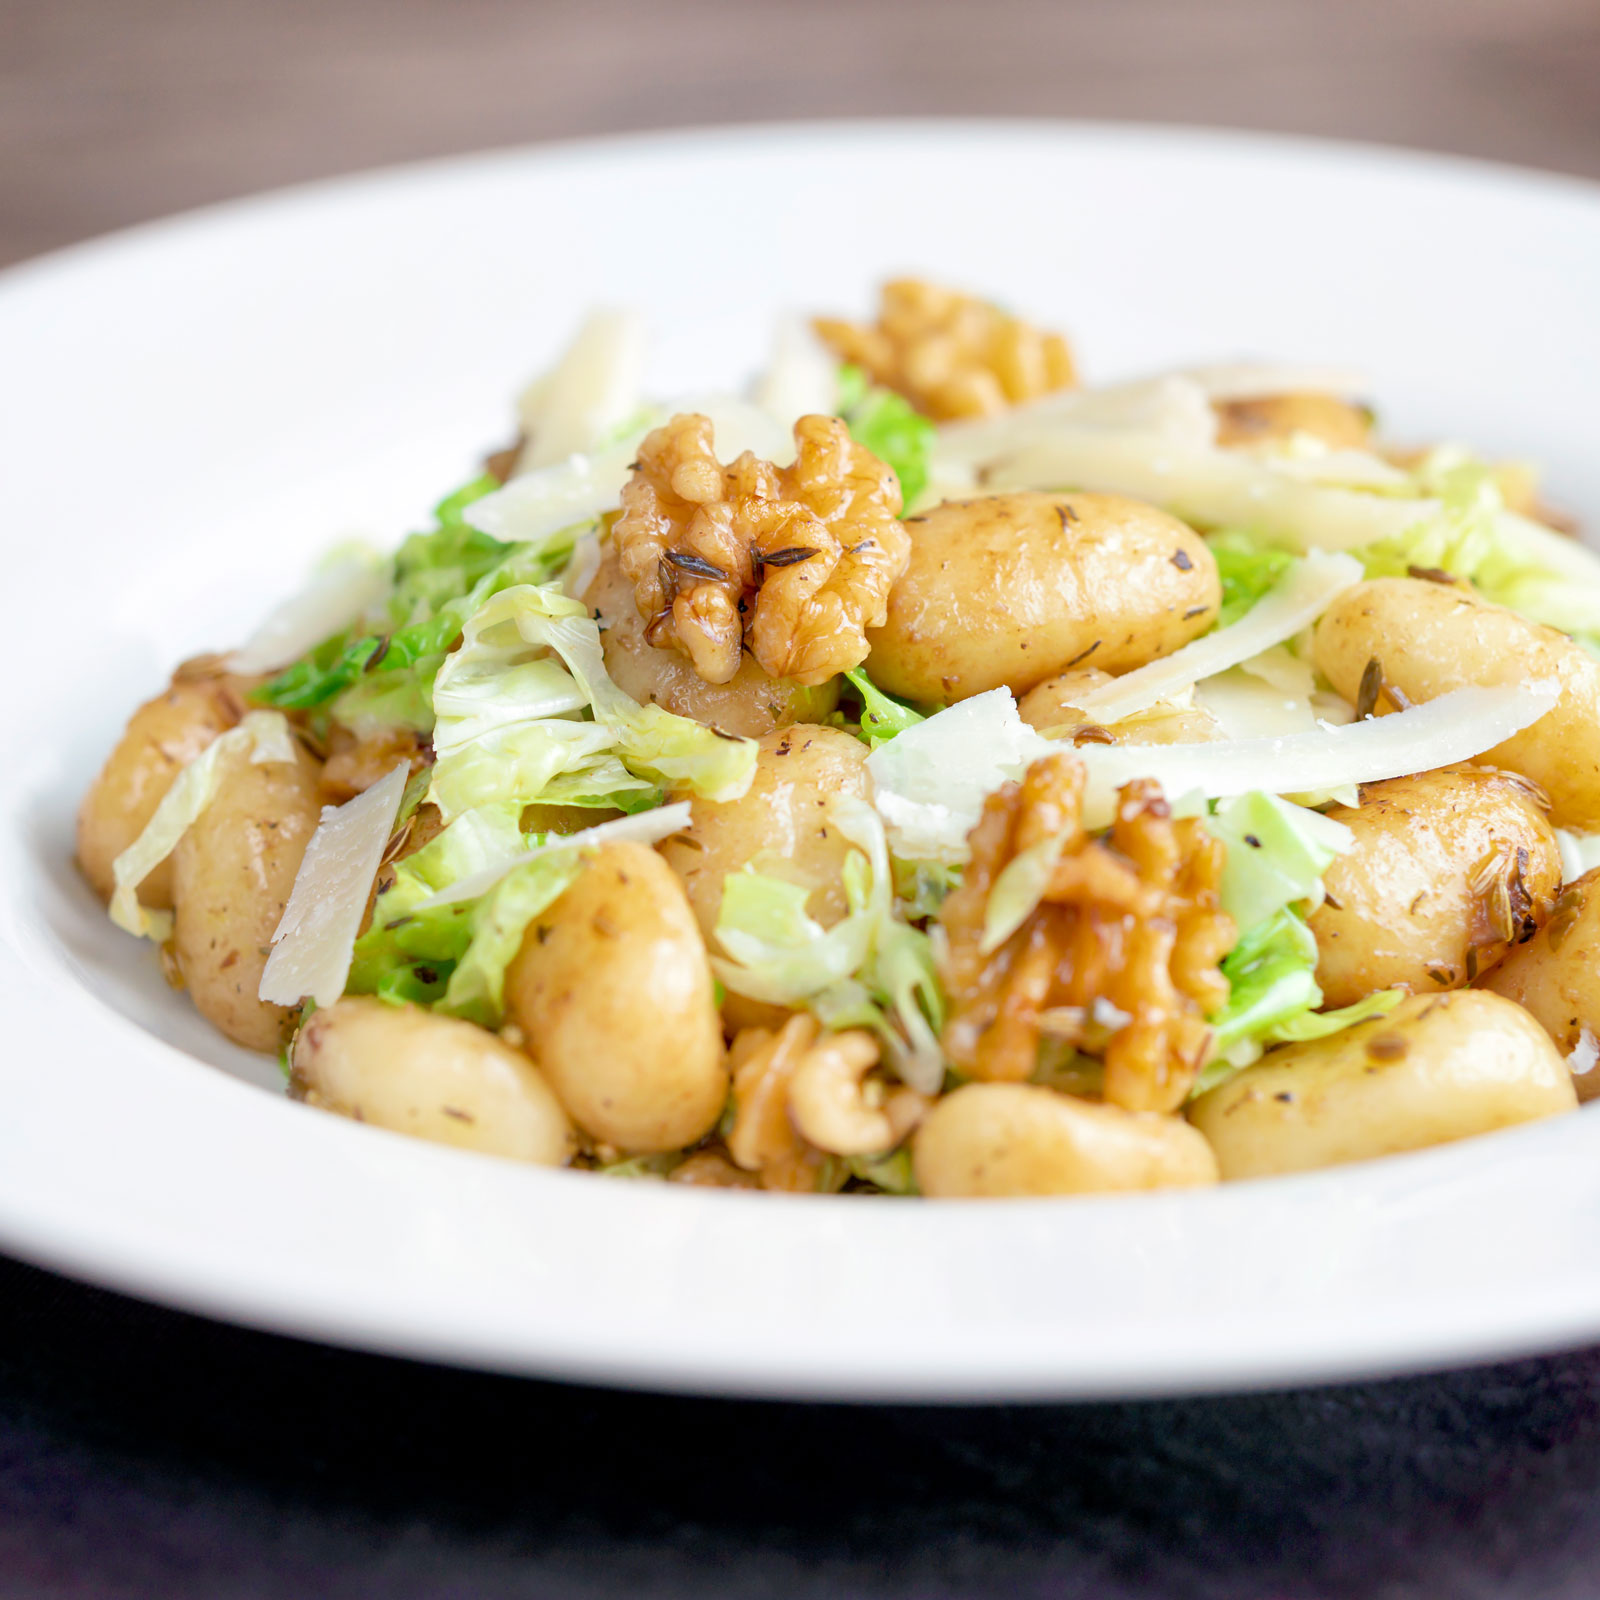 Cabbage gnocchi with fennel seeds and balsamic vinegar served with parmesan shavings.